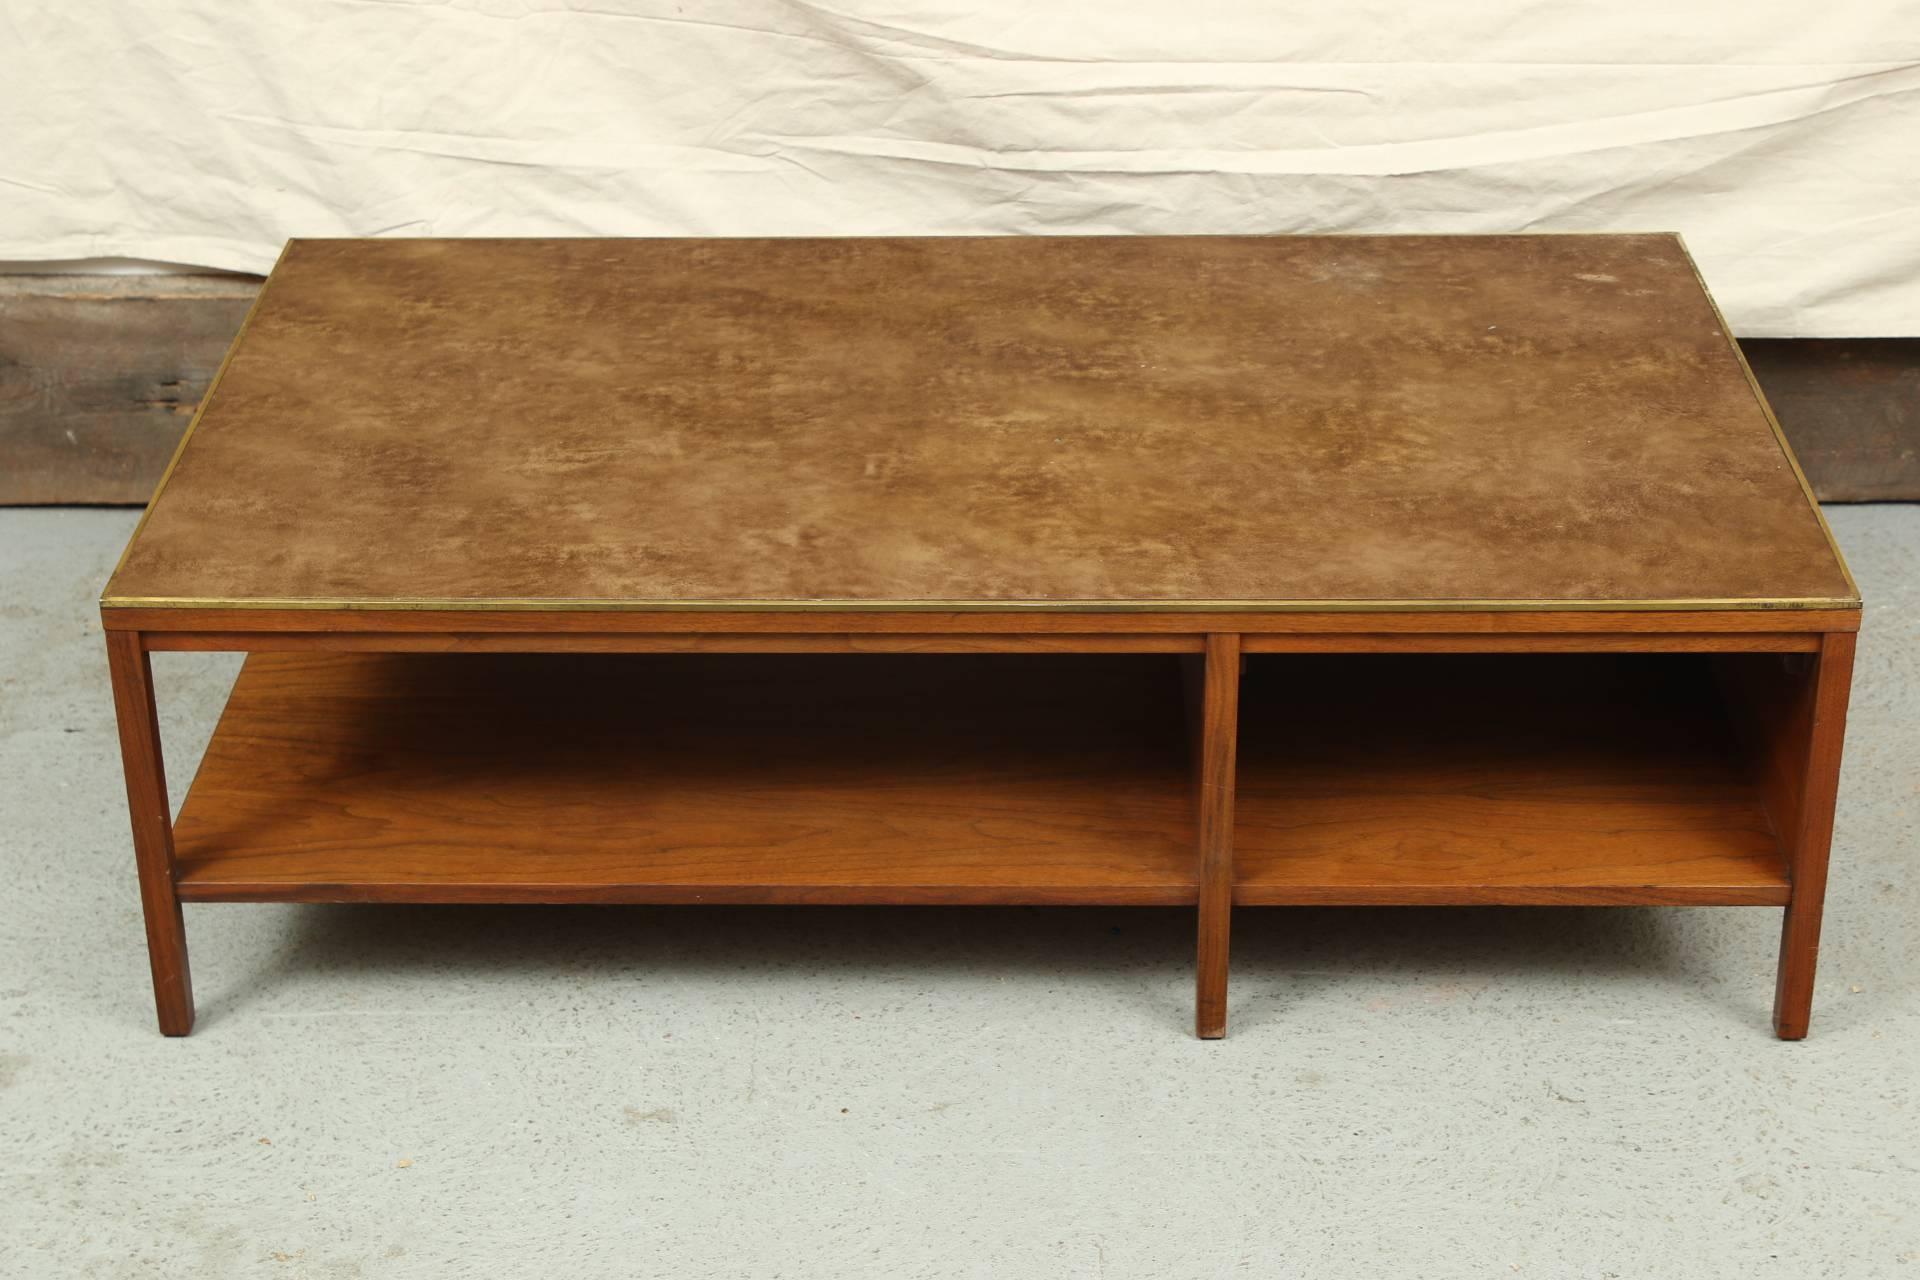 For Calvin. Walnut two-tiered table with a lacquered mottled brown leather top with brass banding. The lower tier in two sections with a single drawer with gray metal pulls on the solid side, and a slightly recessed top band with inset square